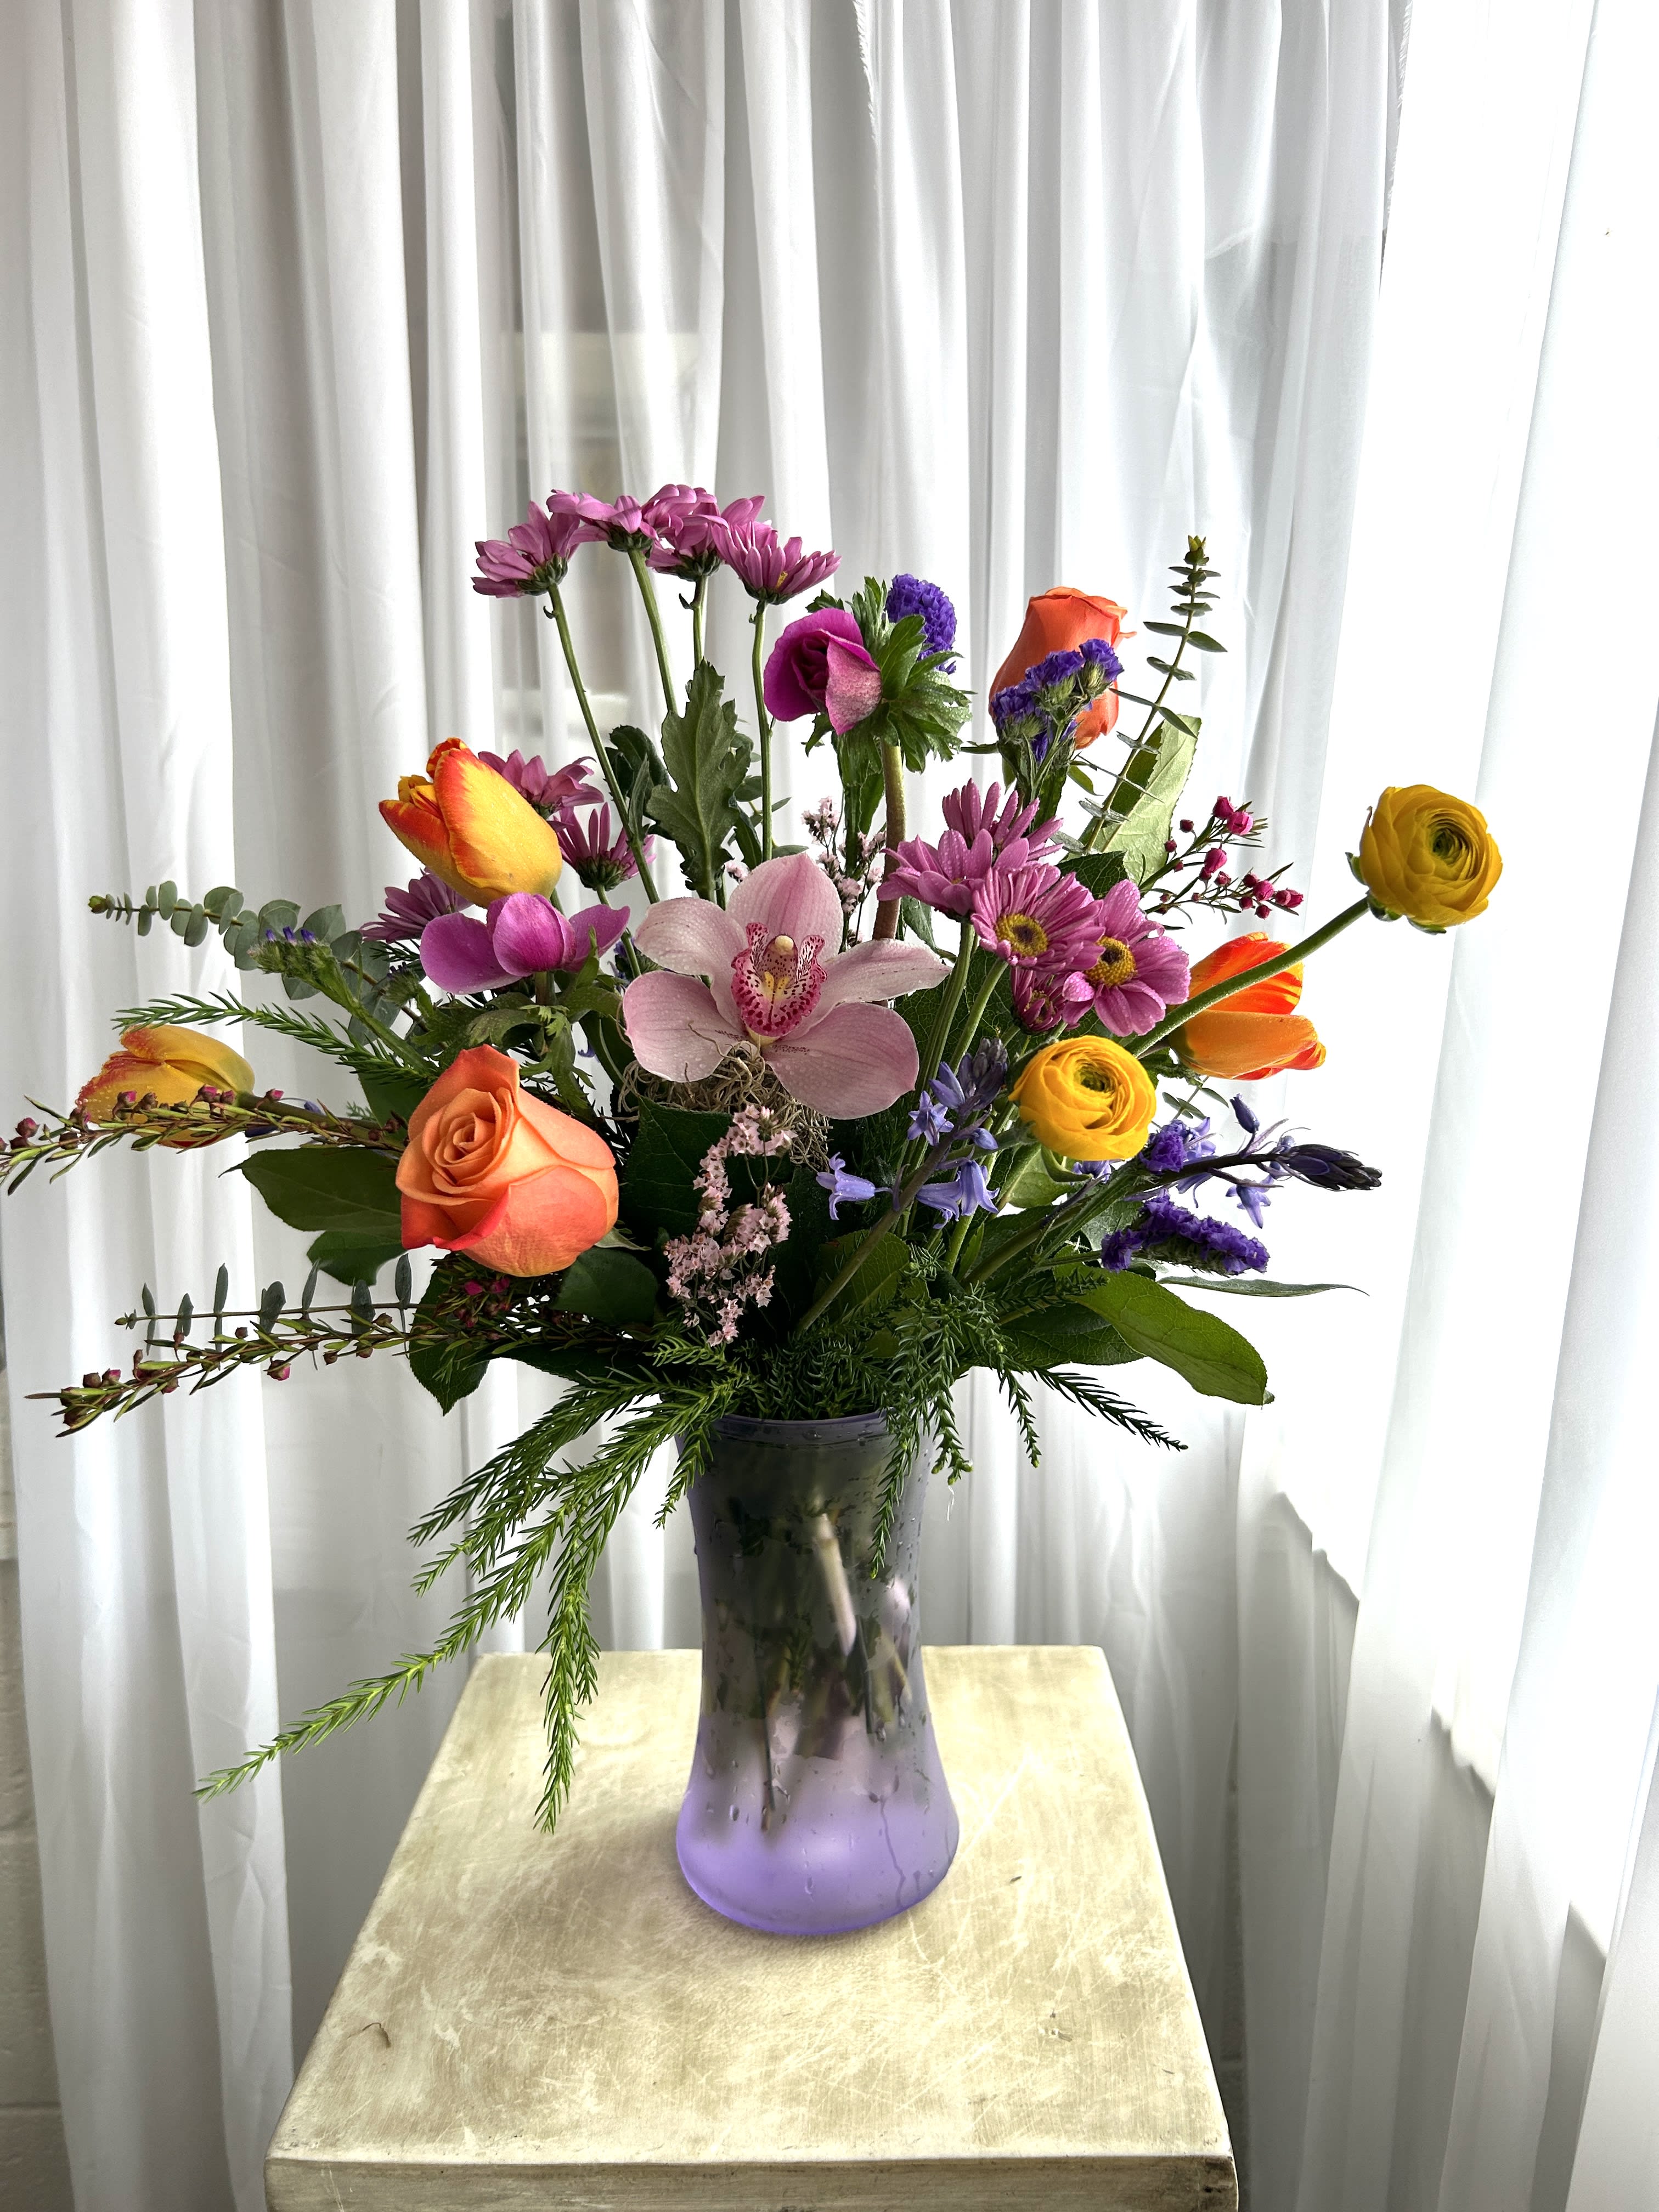 Robin's Rest - A fresh haven of spring.  Anemoneas, ranunculus, tulips, and other wonderful spring flowers gather in a lavender vase.  As always, call shop to find out what's in stock, because our inventory of both flowers and vases constantly changes.